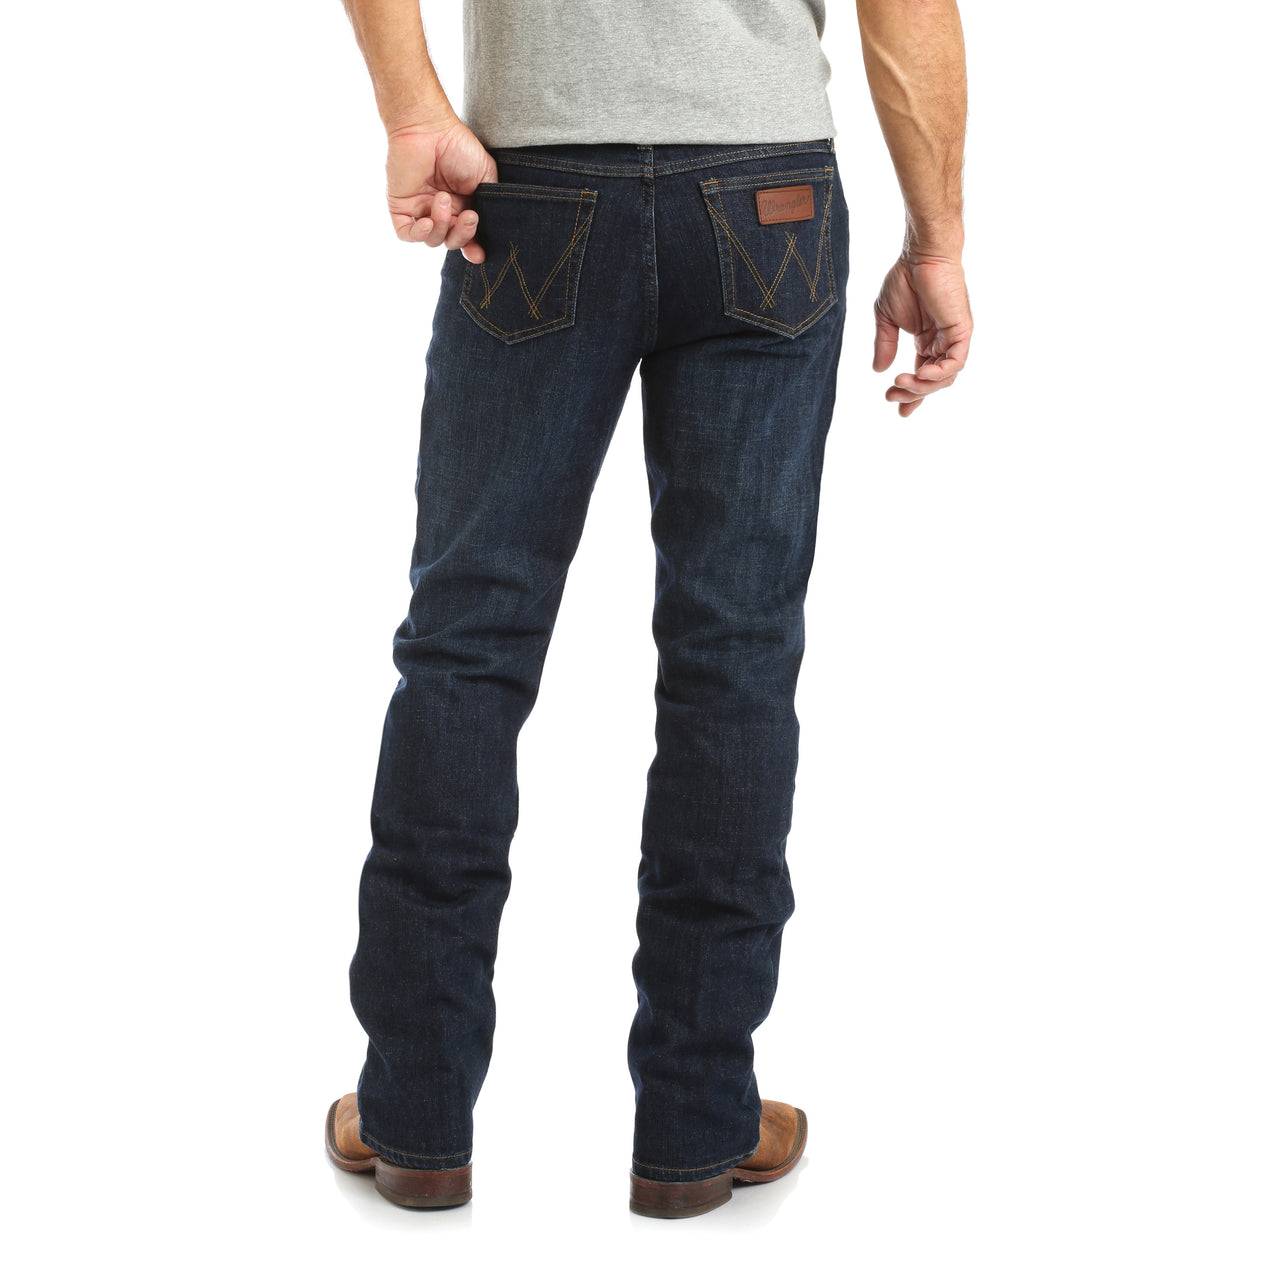 Wrangler 20X Competition Slim Fit Jeans - Twilight